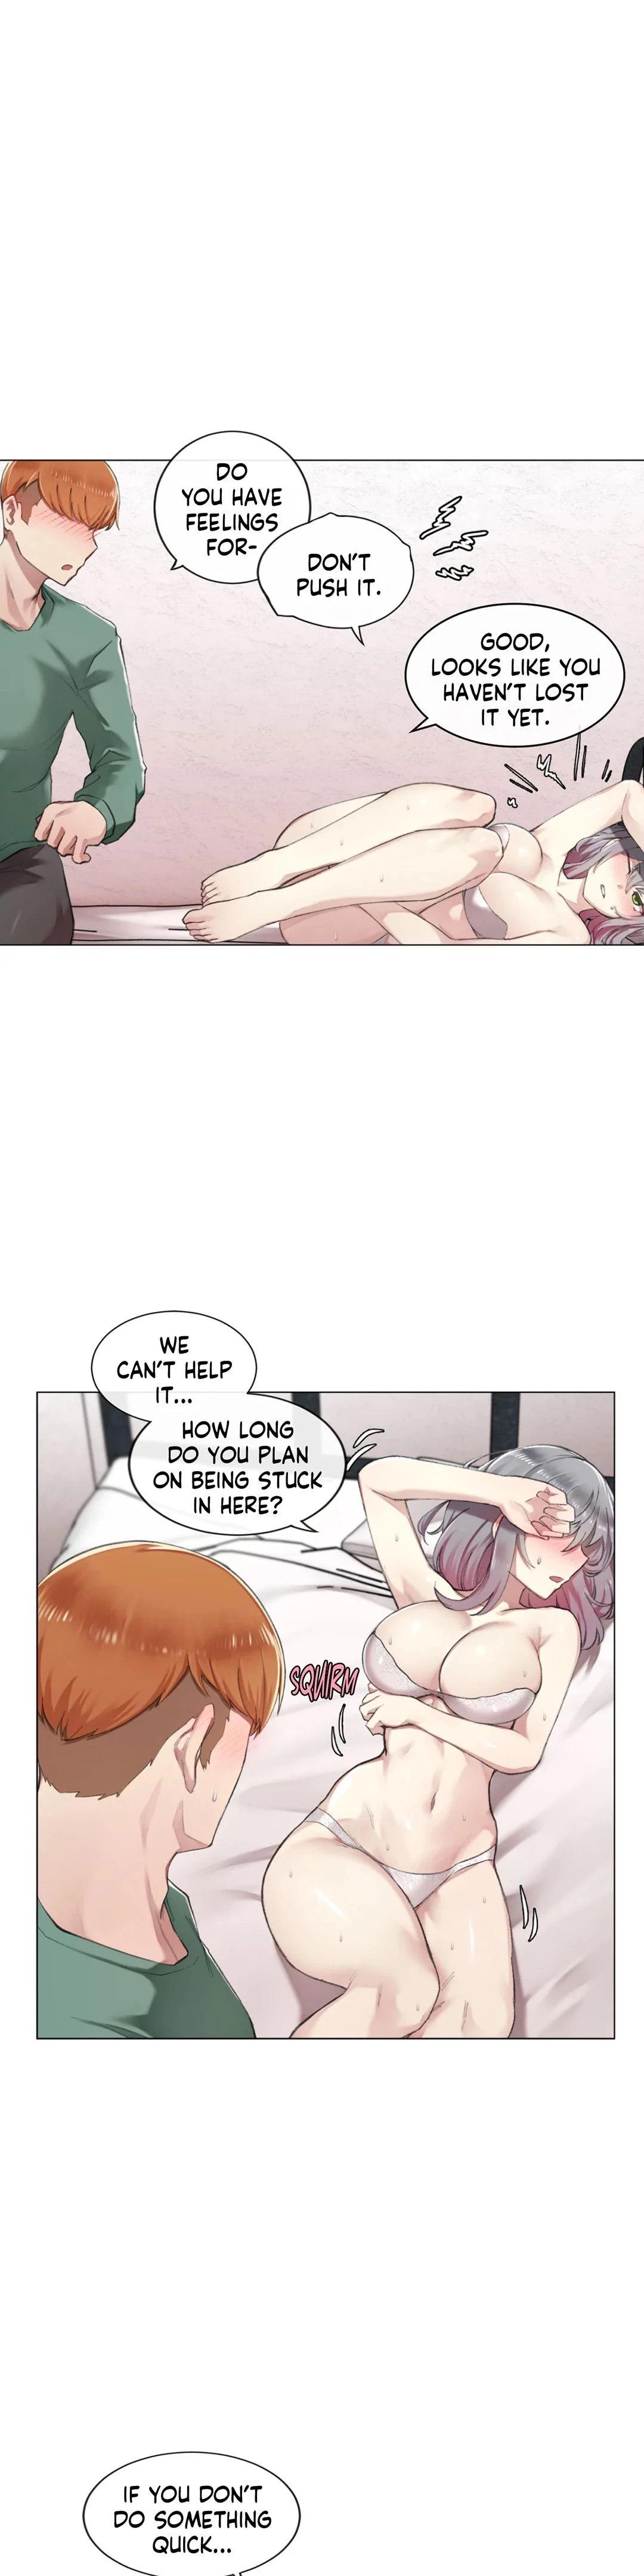 [Dumangoon, KONG_] Sexcape Room: Snap Off Ch.7/7 [English] [Manhwa PDF] Completed 41